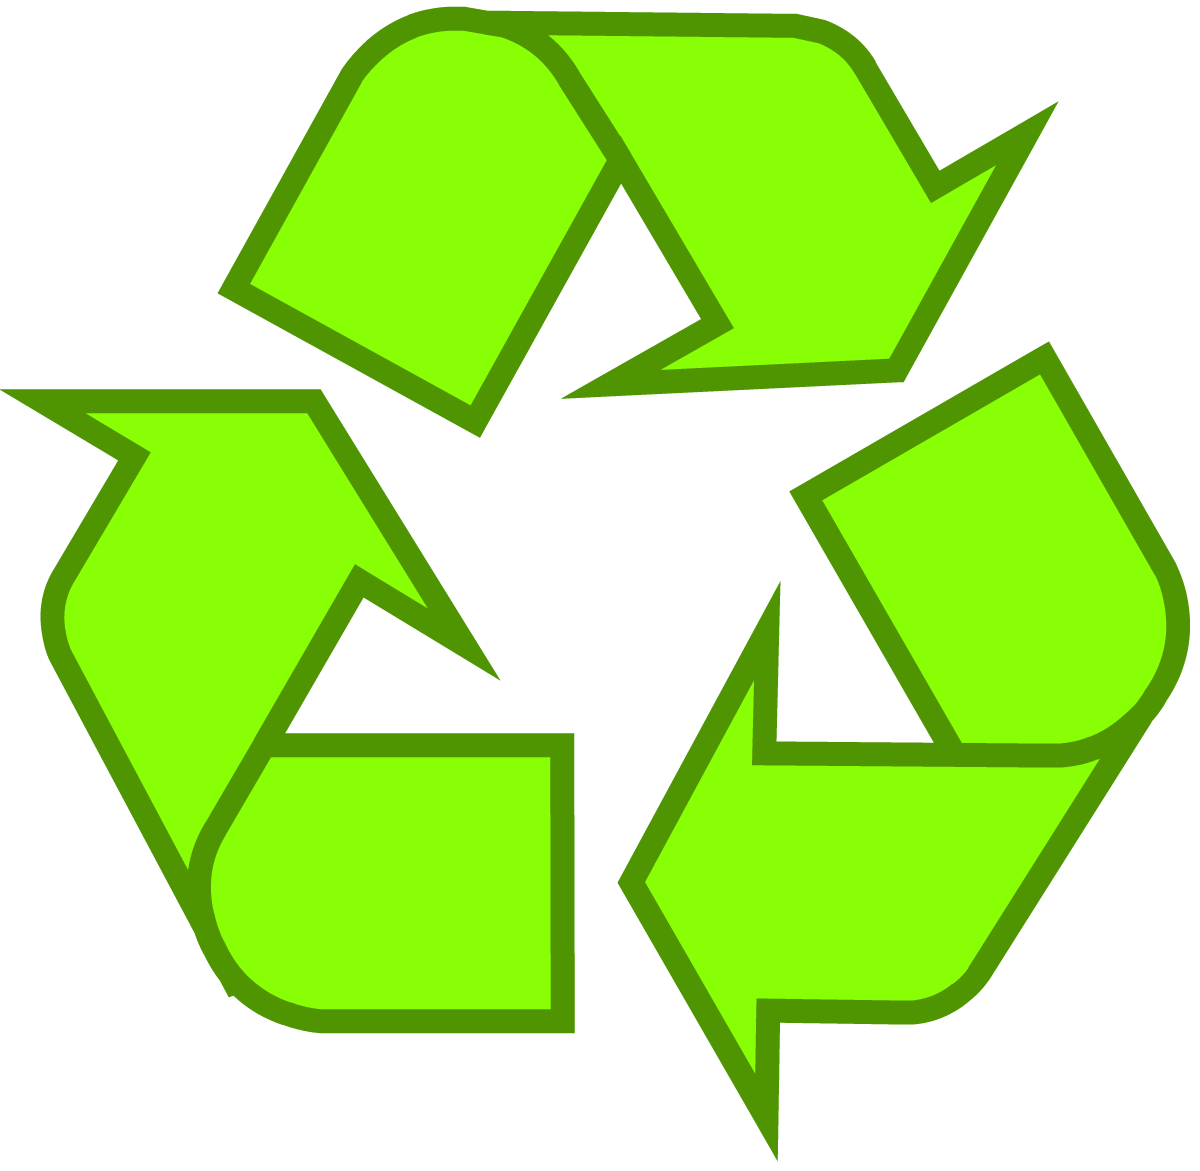 Recylcle Logo - Recycling Symbol - Download the Original Recycle Logo